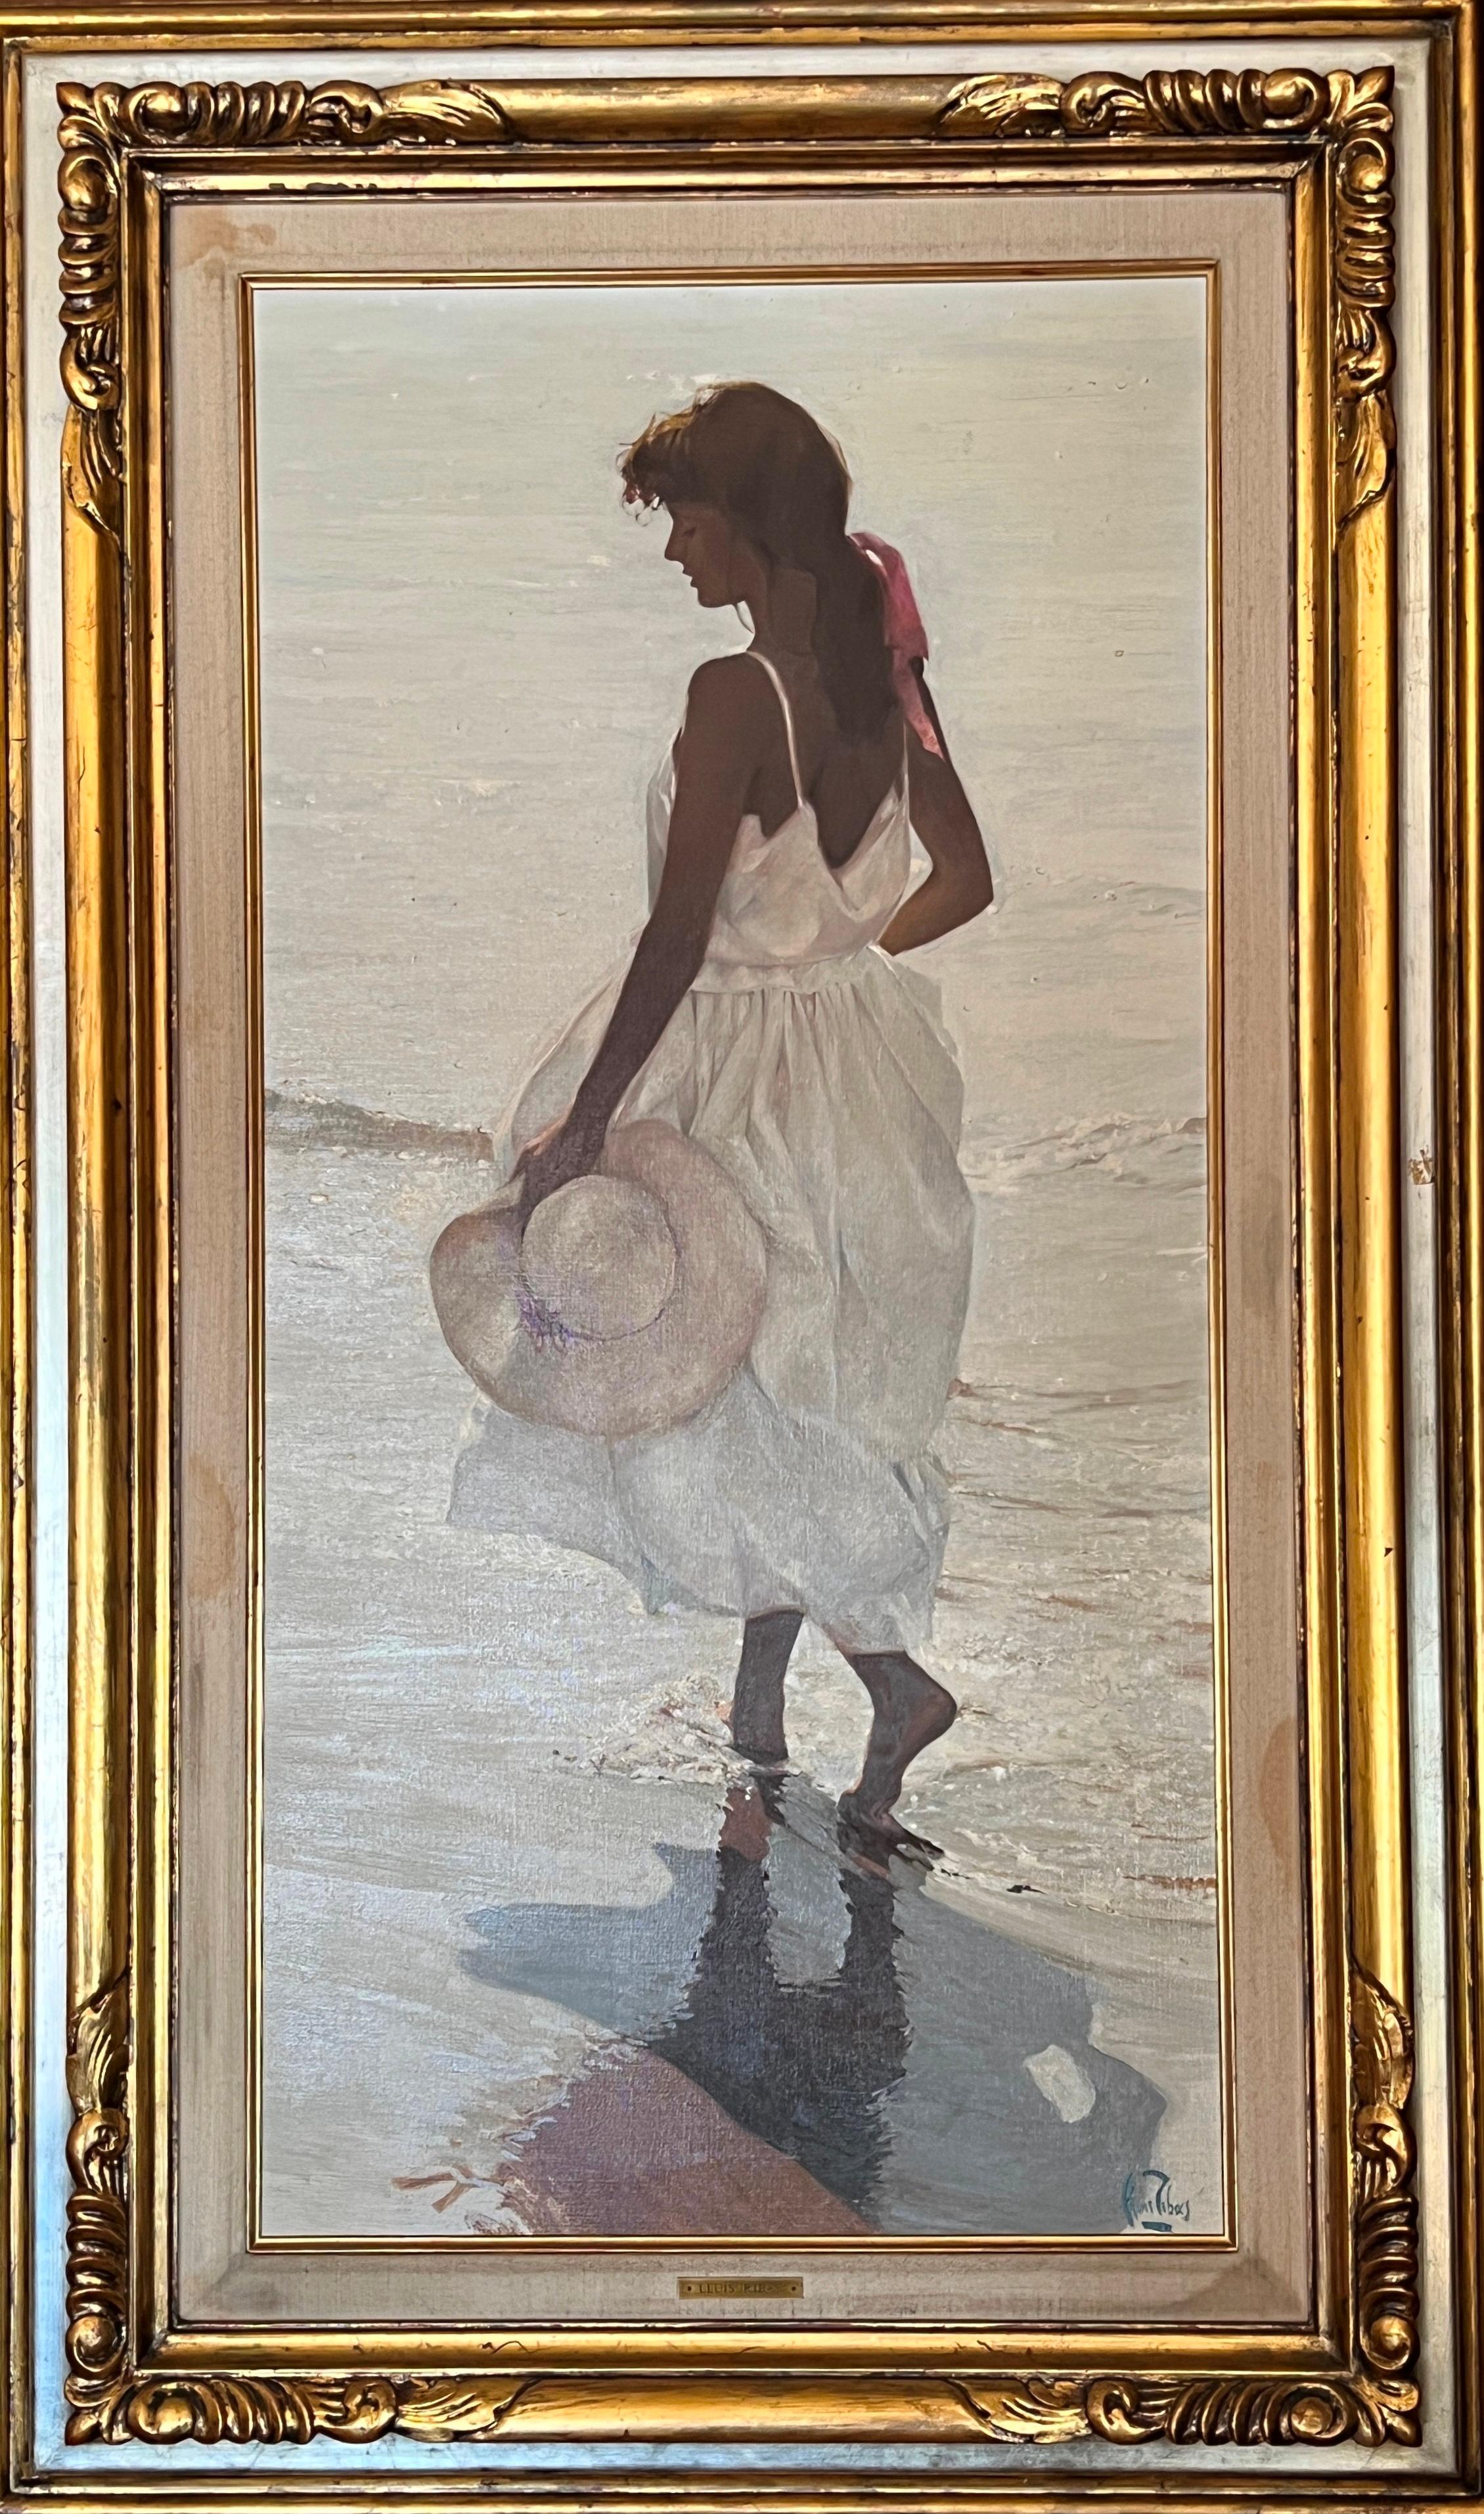 Mediterranean  original landscape acrylic painting
 Ribas (El Masnou, Barcelona, 1949) is a Spanish painter whose large and hyper-realistic paintings reflect, above all, the beauty of women framed in nature, preferably in the sea, although their